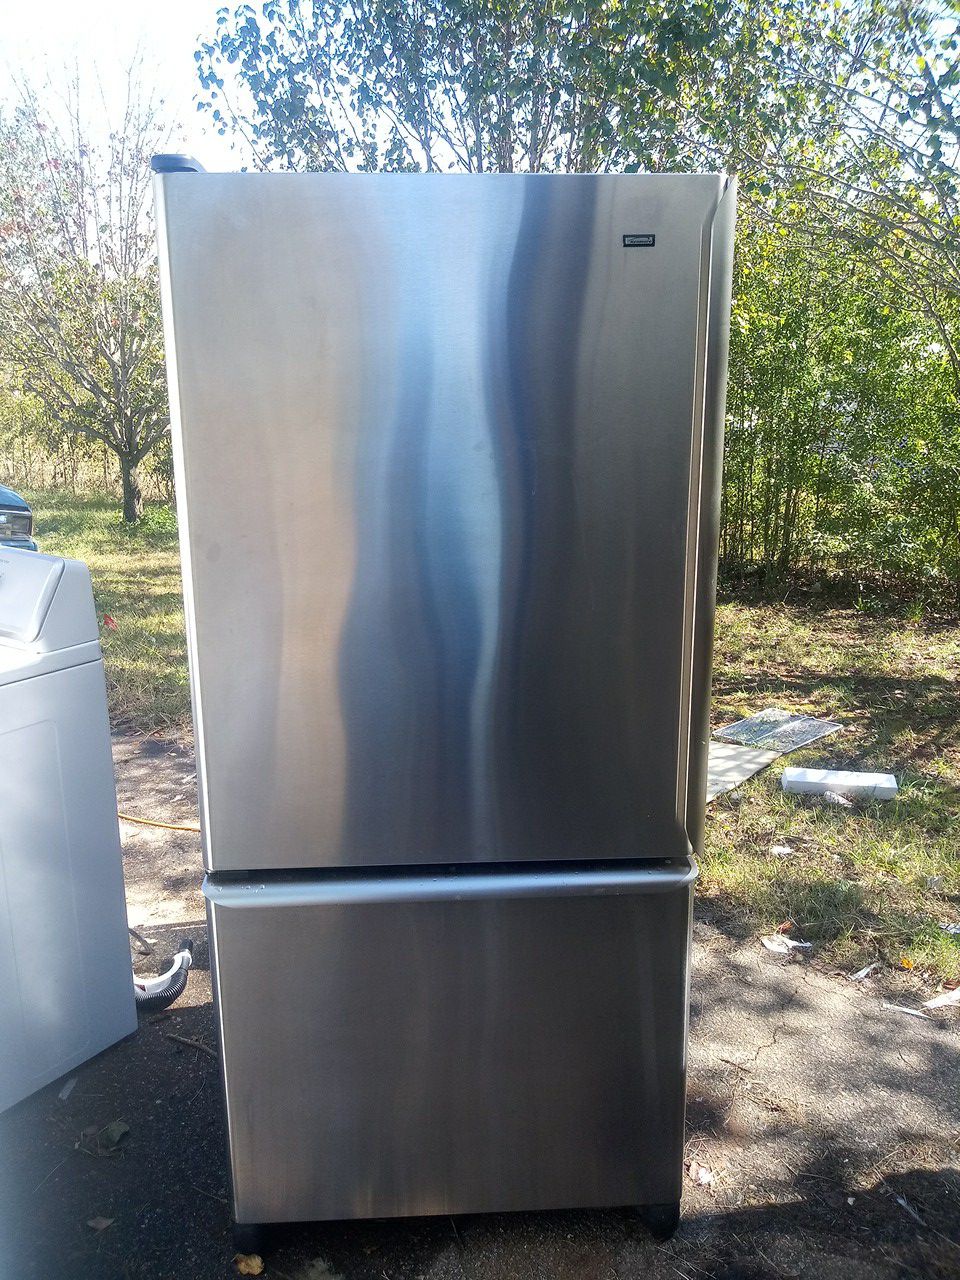 Kenmore frost-free stainless steel refrigerator freezer on the bottom